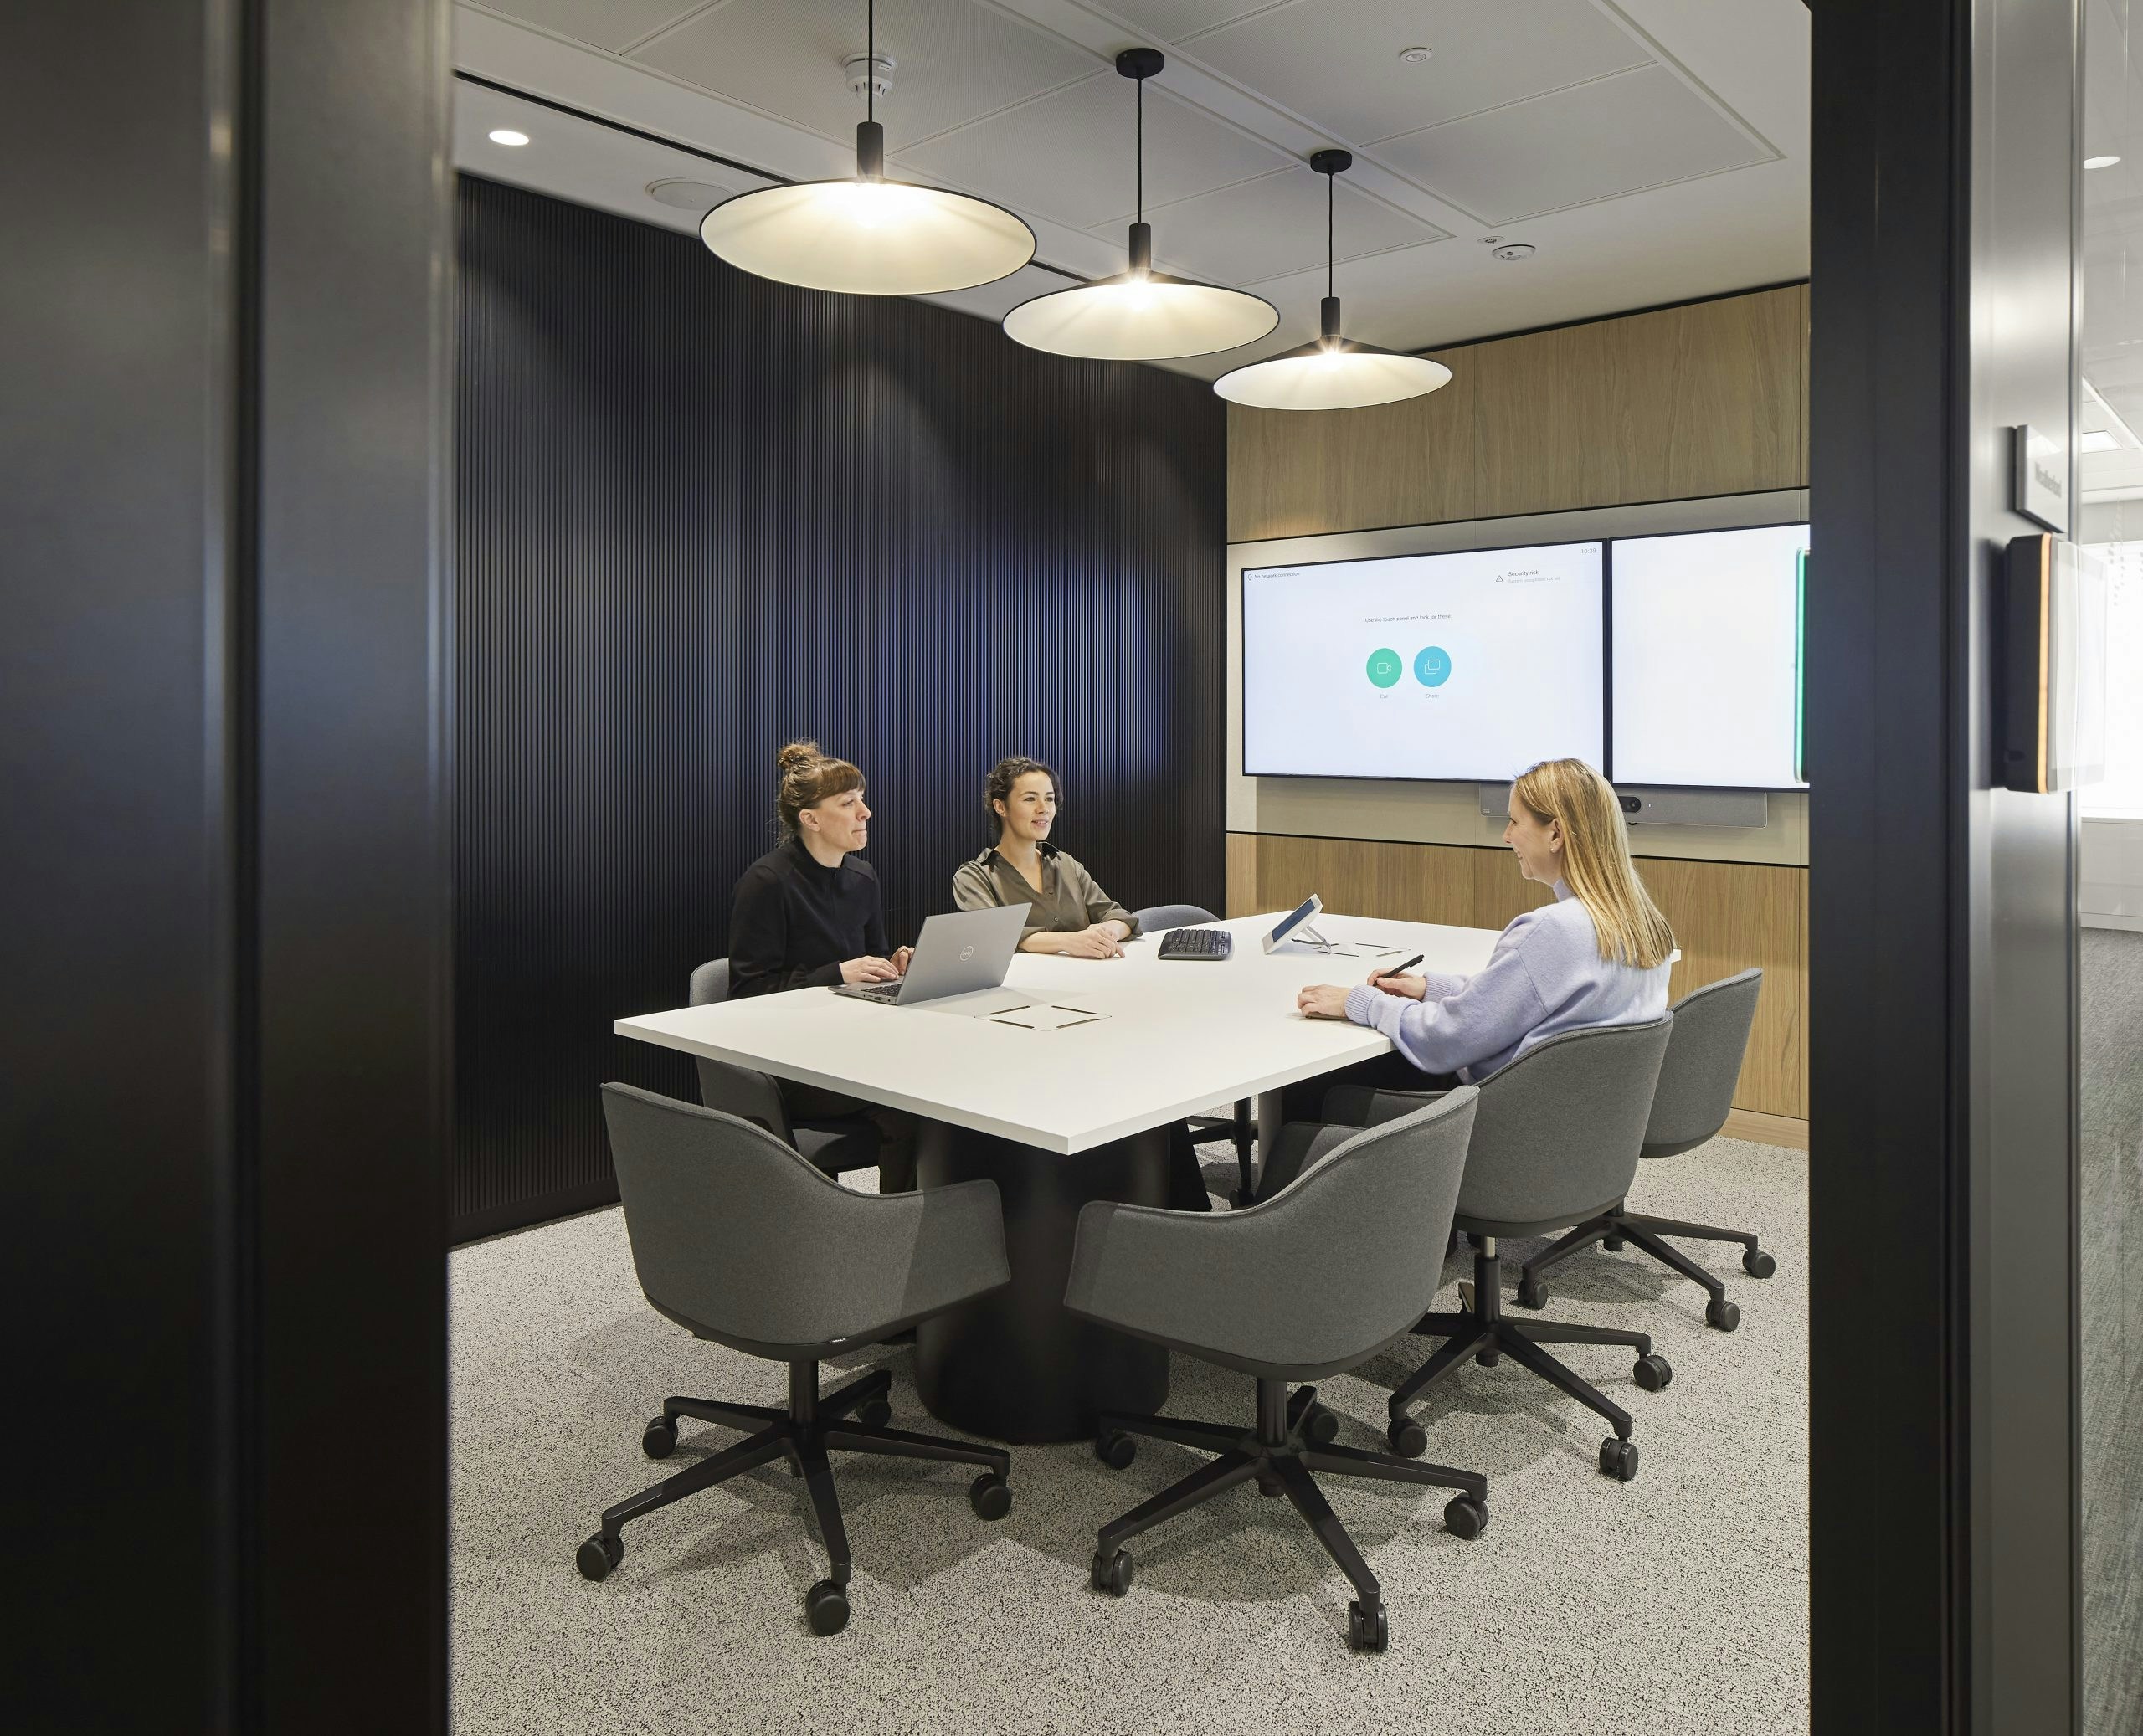 Technologically Equipped Spaces for Team Meetings